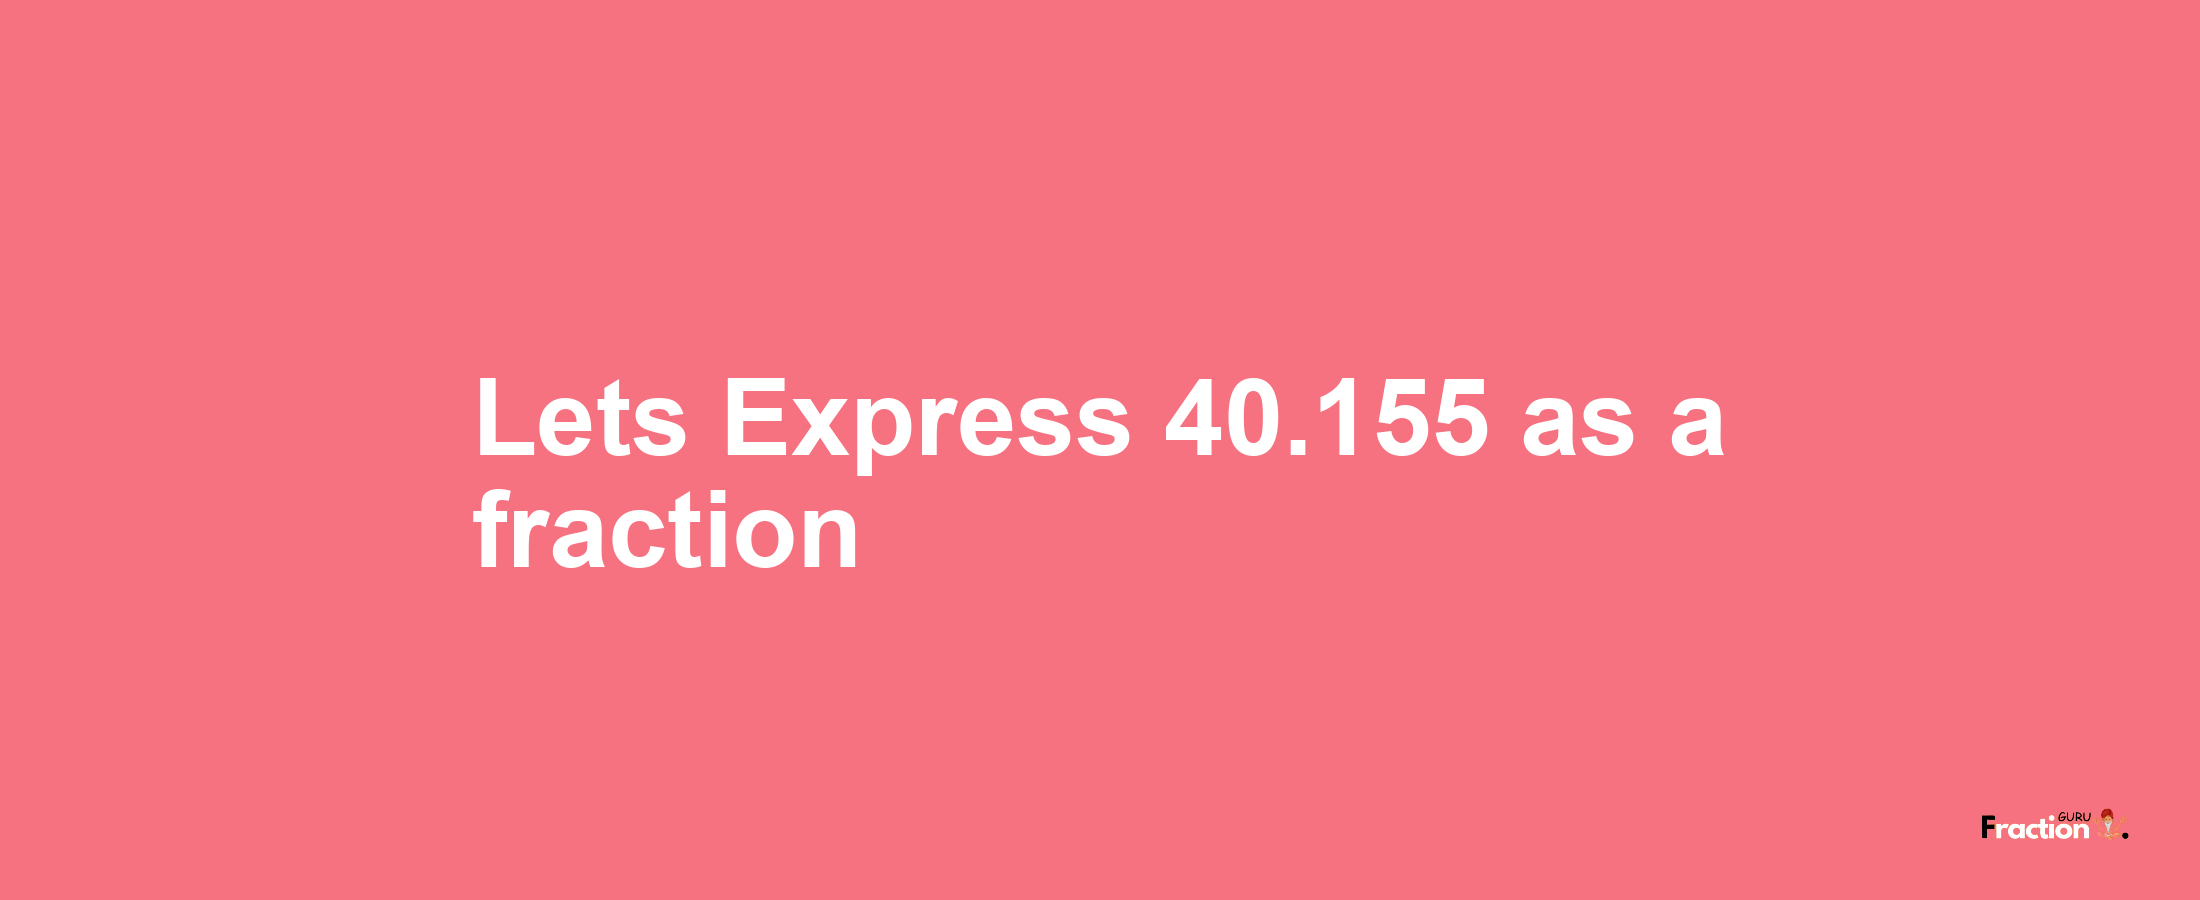 Lets Express 40.155 as afraction